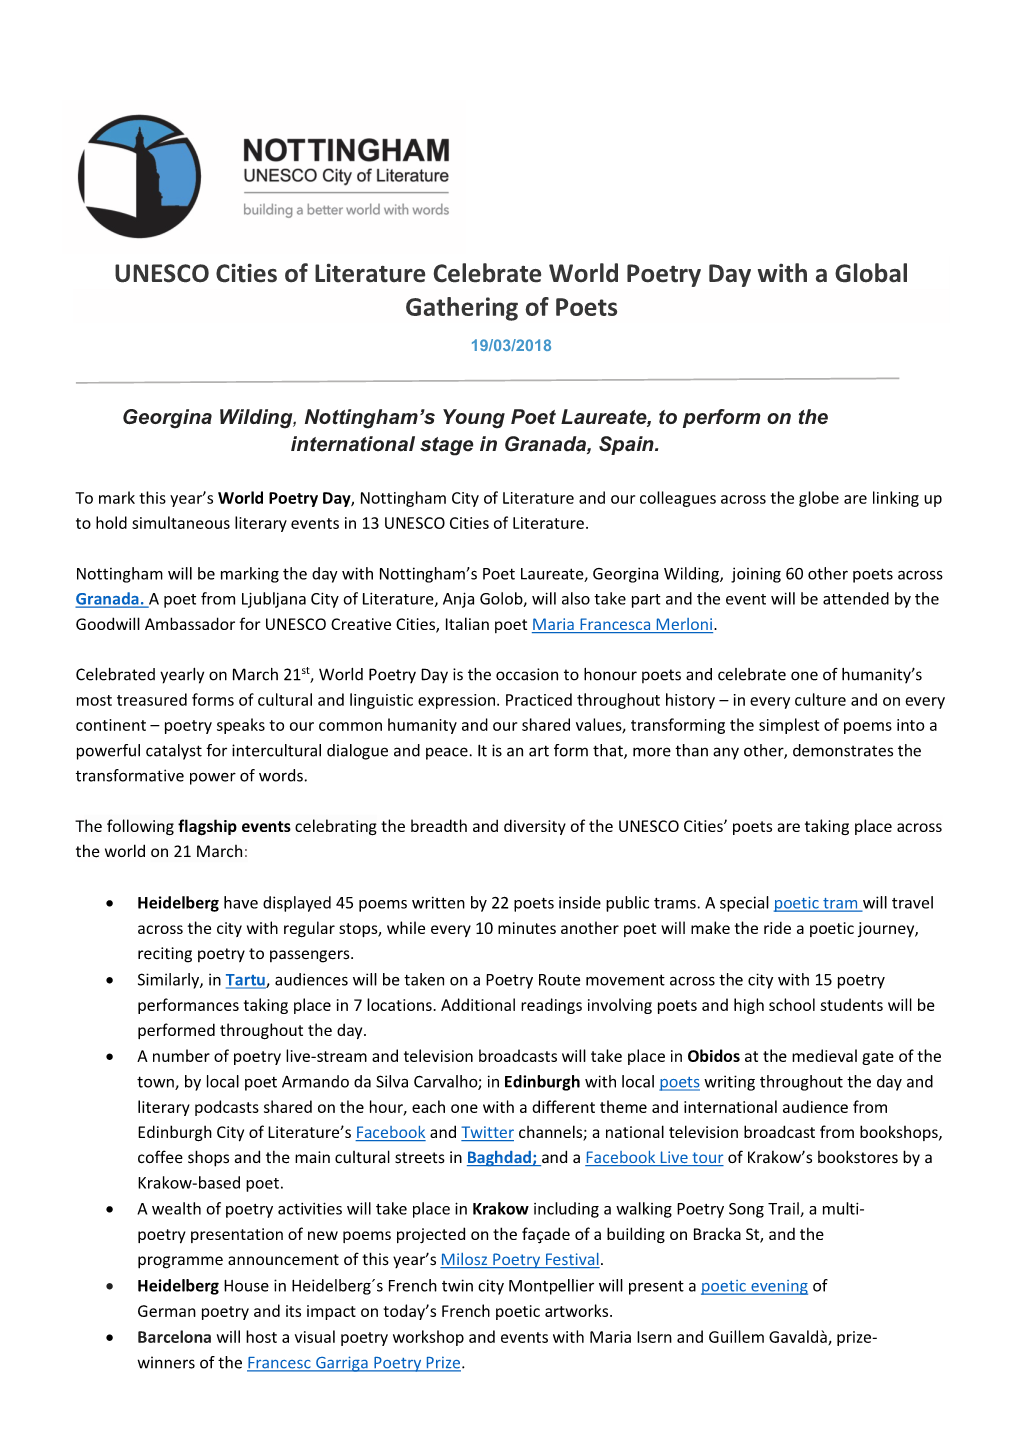 UNESCO Cities of Literature Celebrate World Poetry Day with a Global Gathering of Poets 19/03/2018